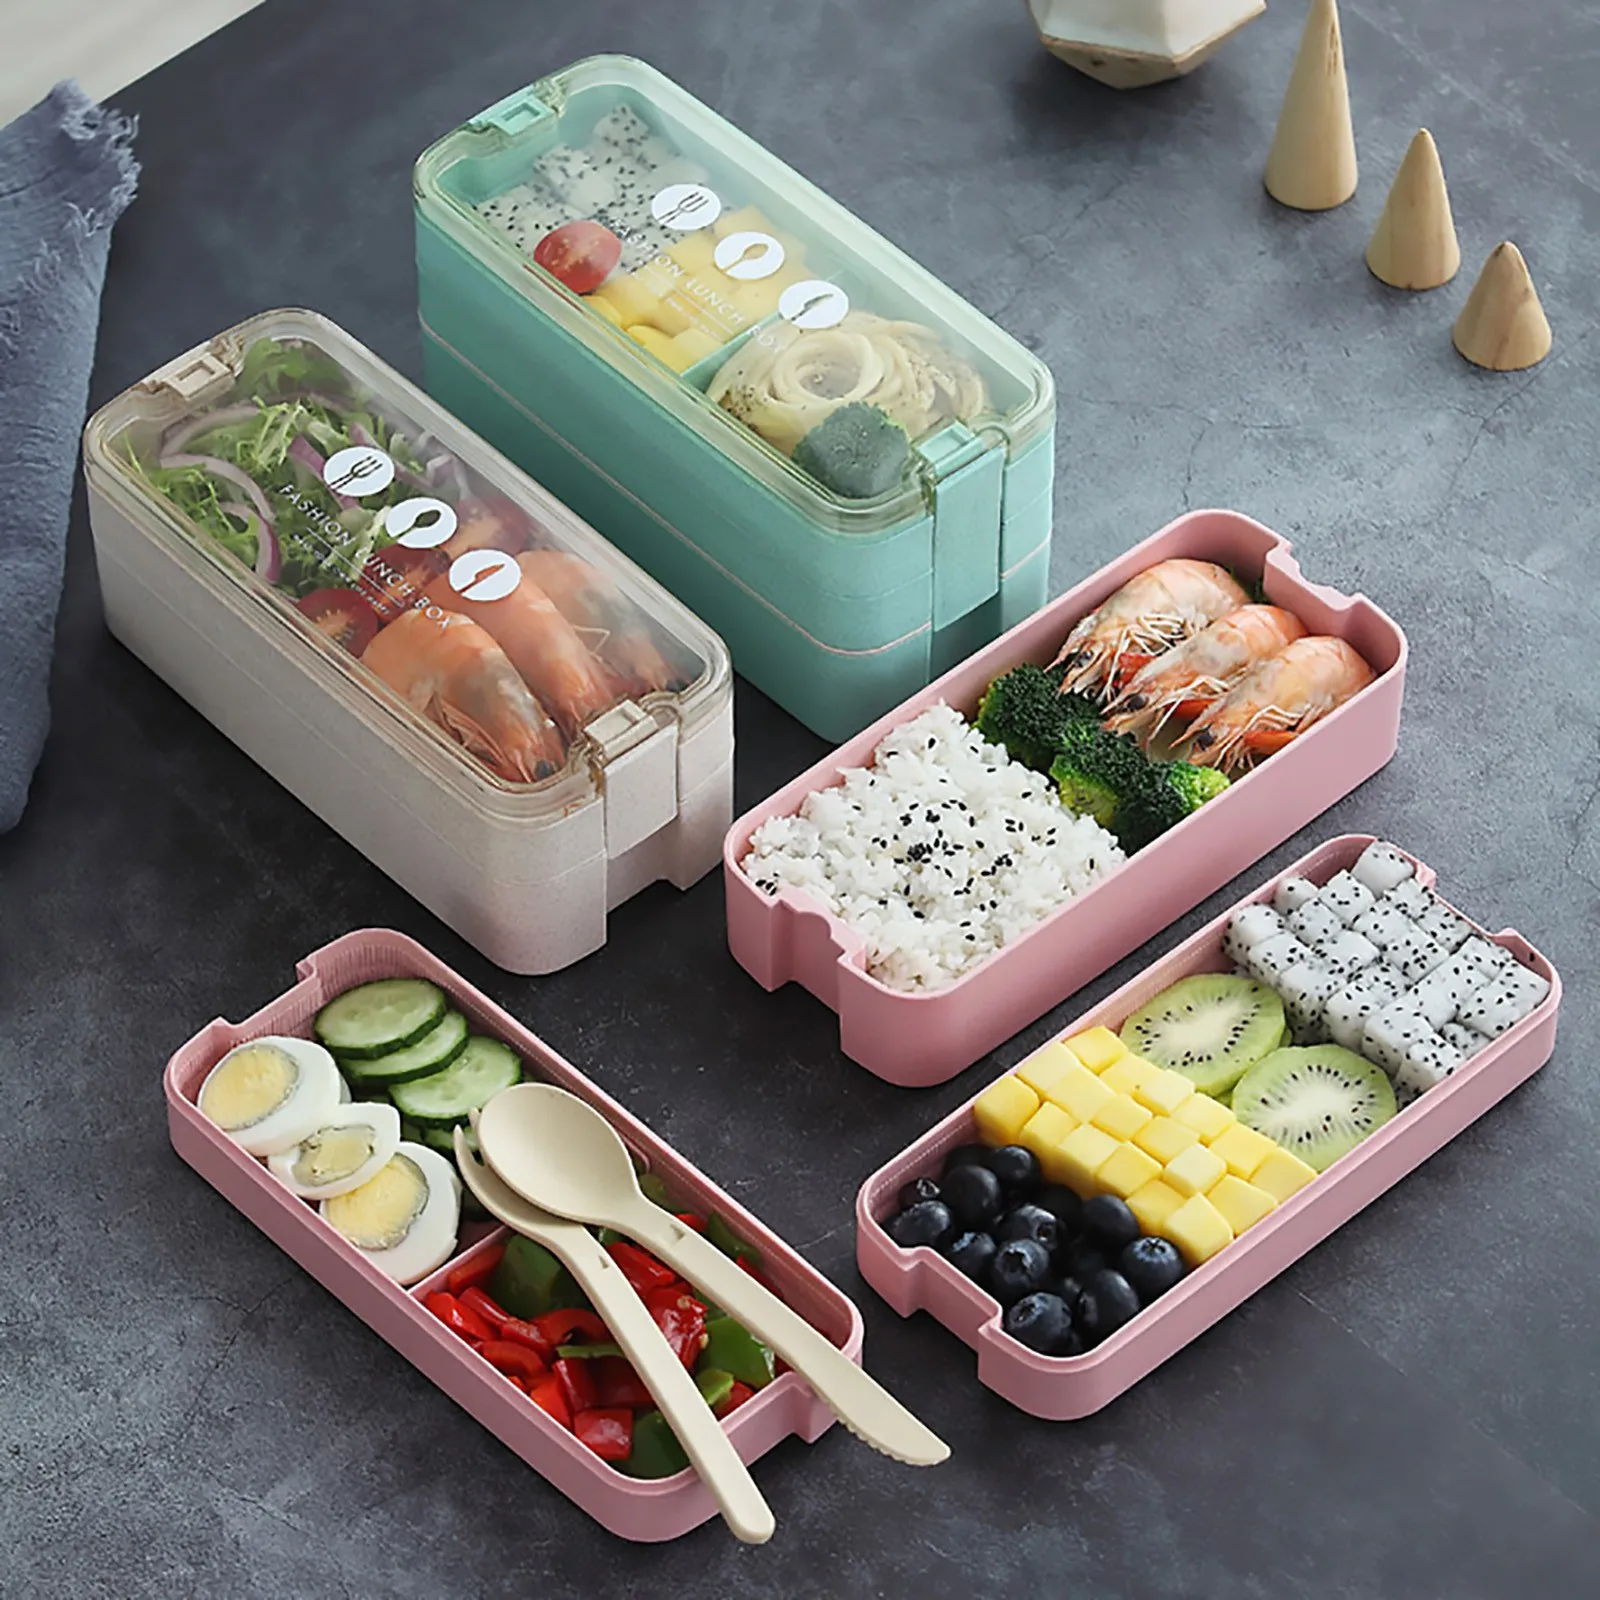 https://ae01.alicdn.com/kf/Sb65f21c8775a4a8085b3f9f682022ad30/Health-Material-3-Layers-Lunch-Box-Microwavable-Japanese-Bento-Food-Container-Eco-friendly-Wheat-Straw-900ml.jpg